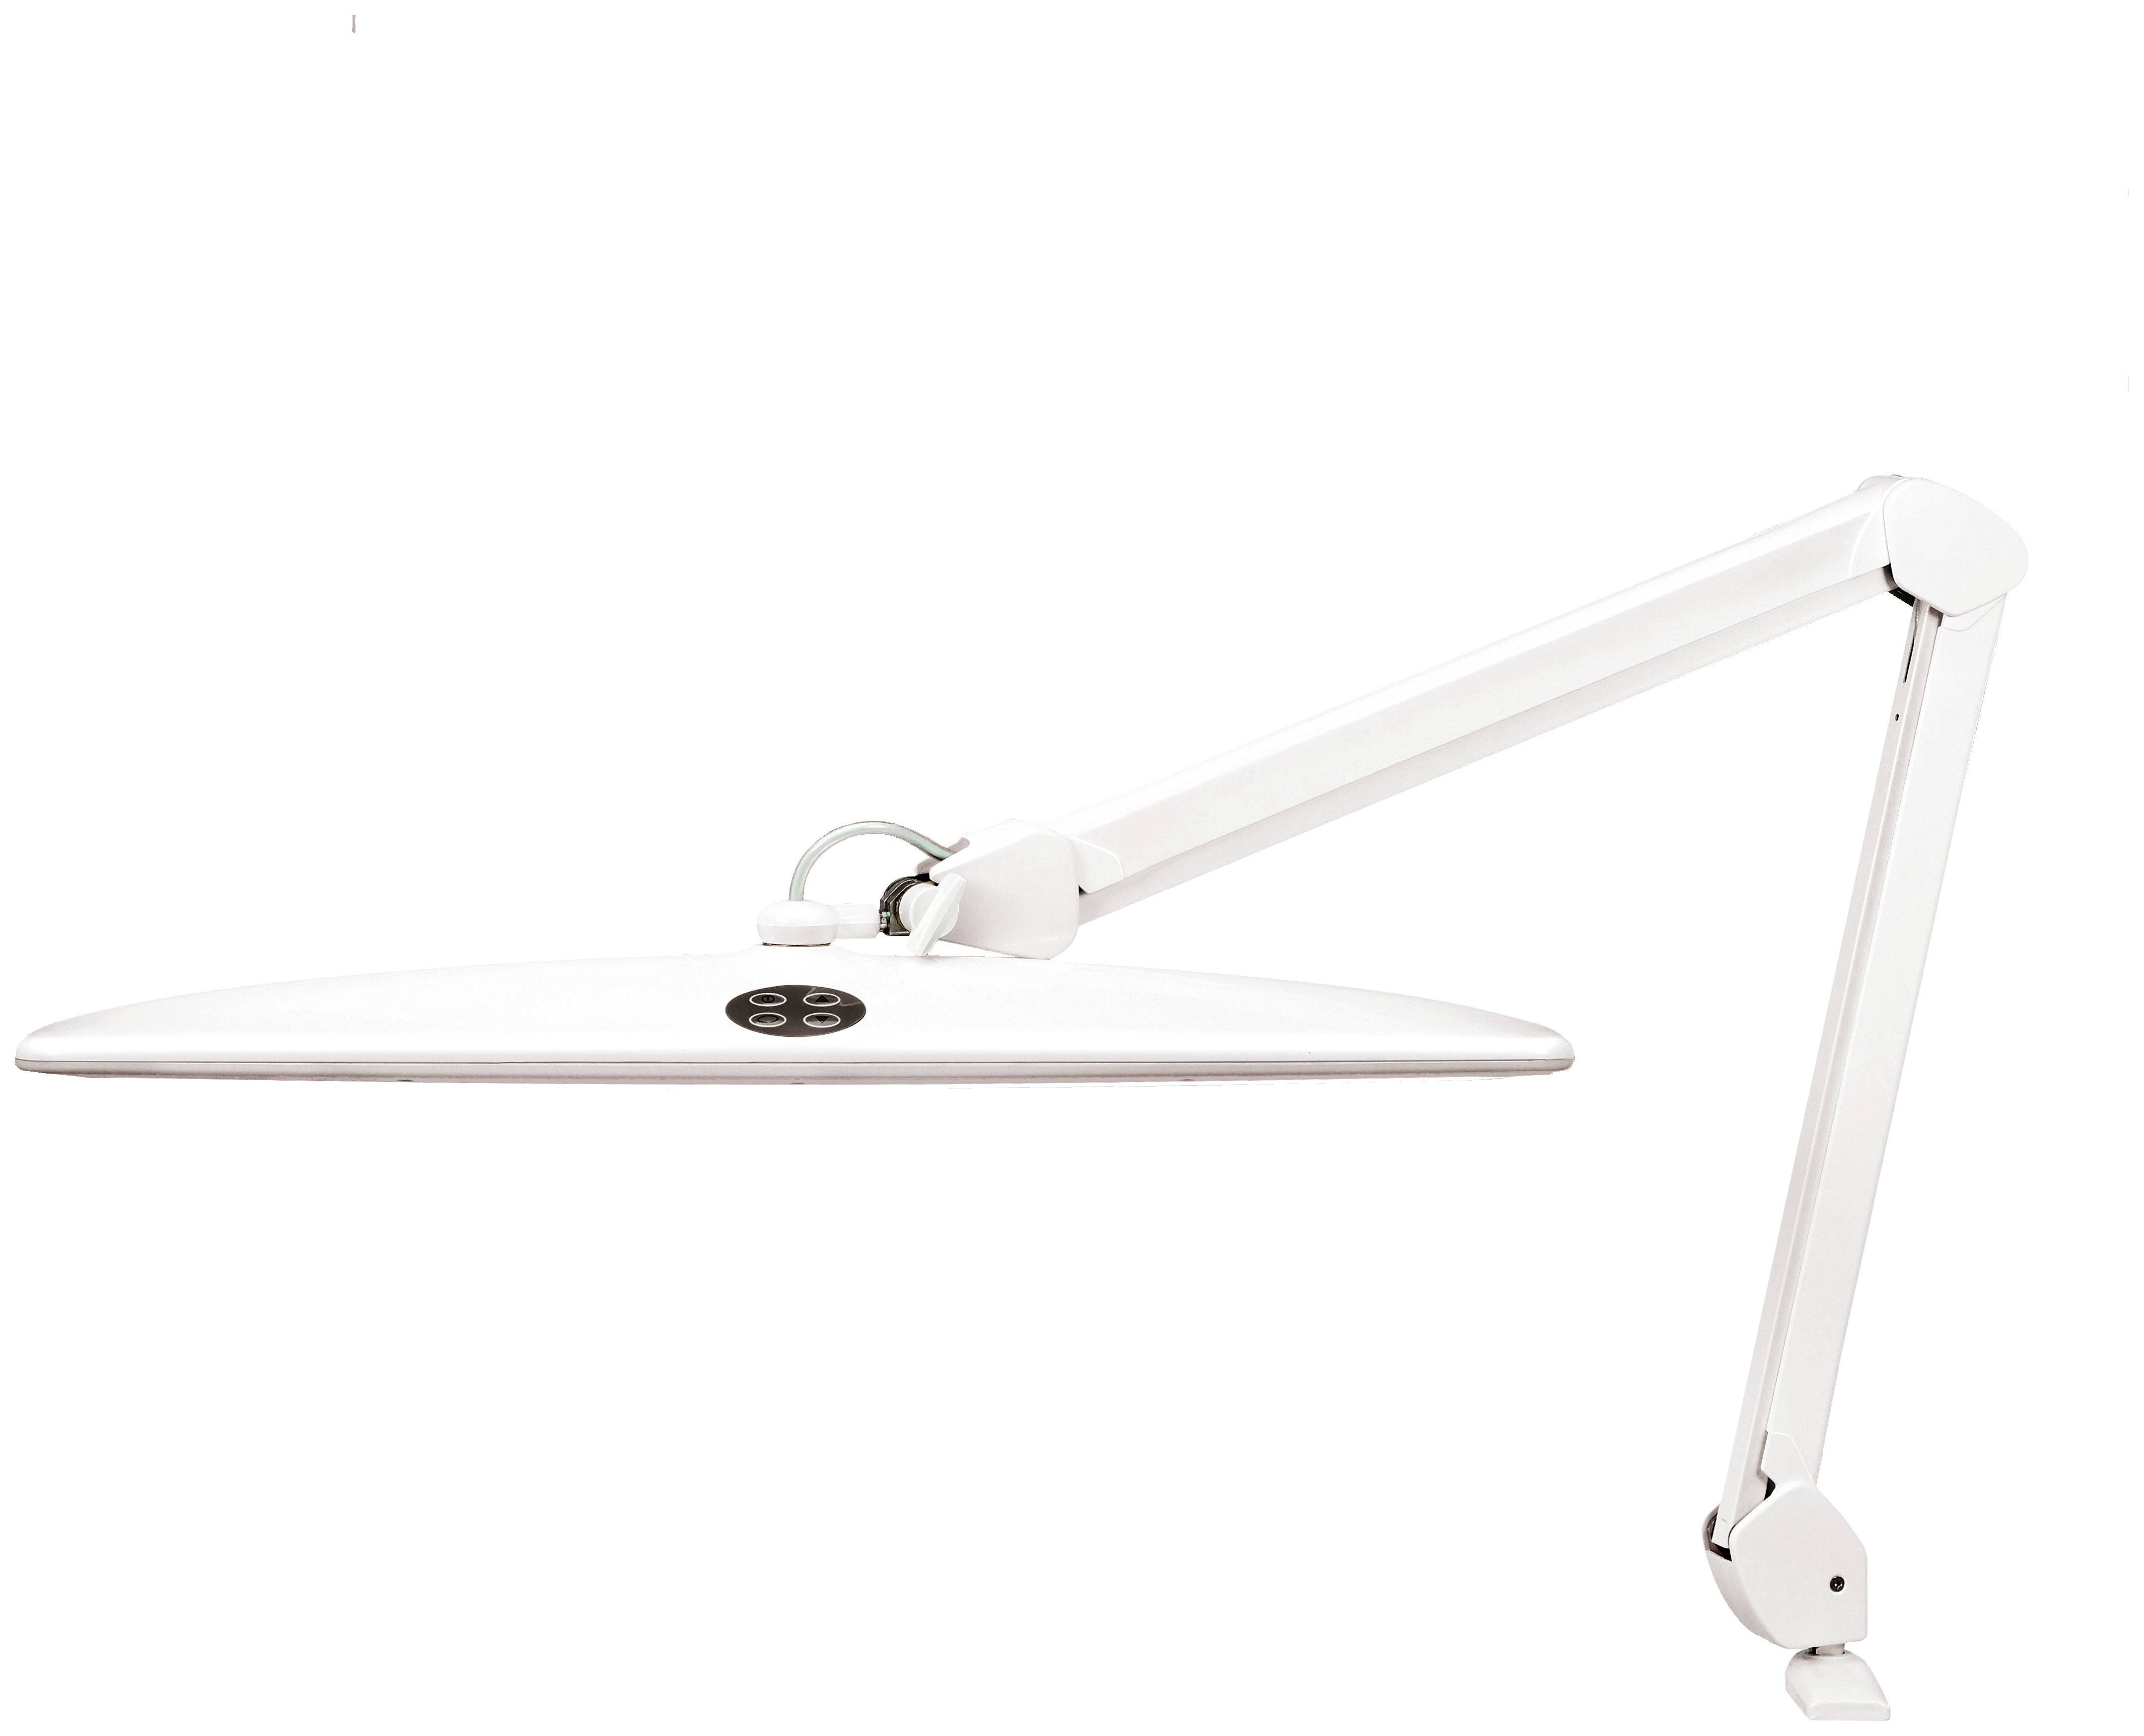 Lightcraft LED Pro Task Lamp with Dimmer Switch